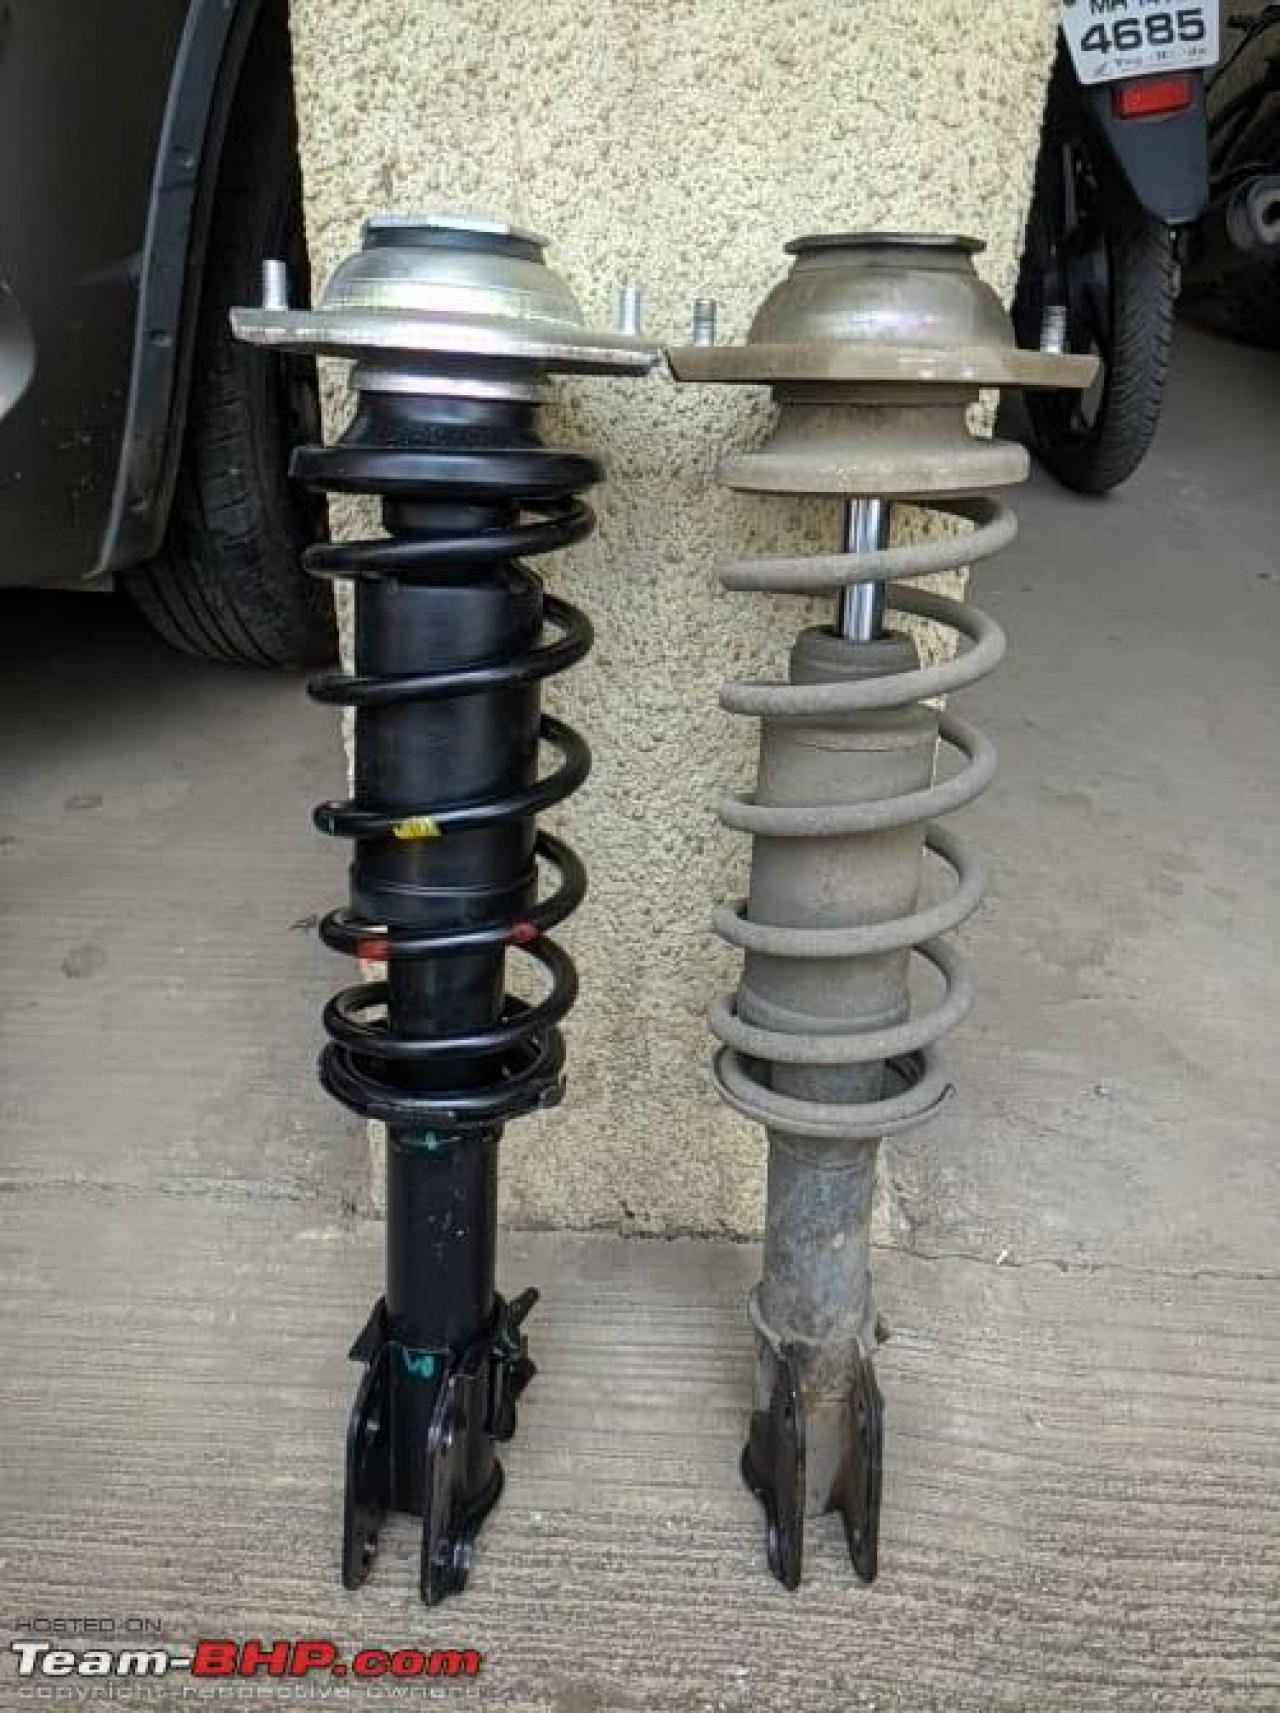 How Much Does A Shock Absorber Replacement Cost?